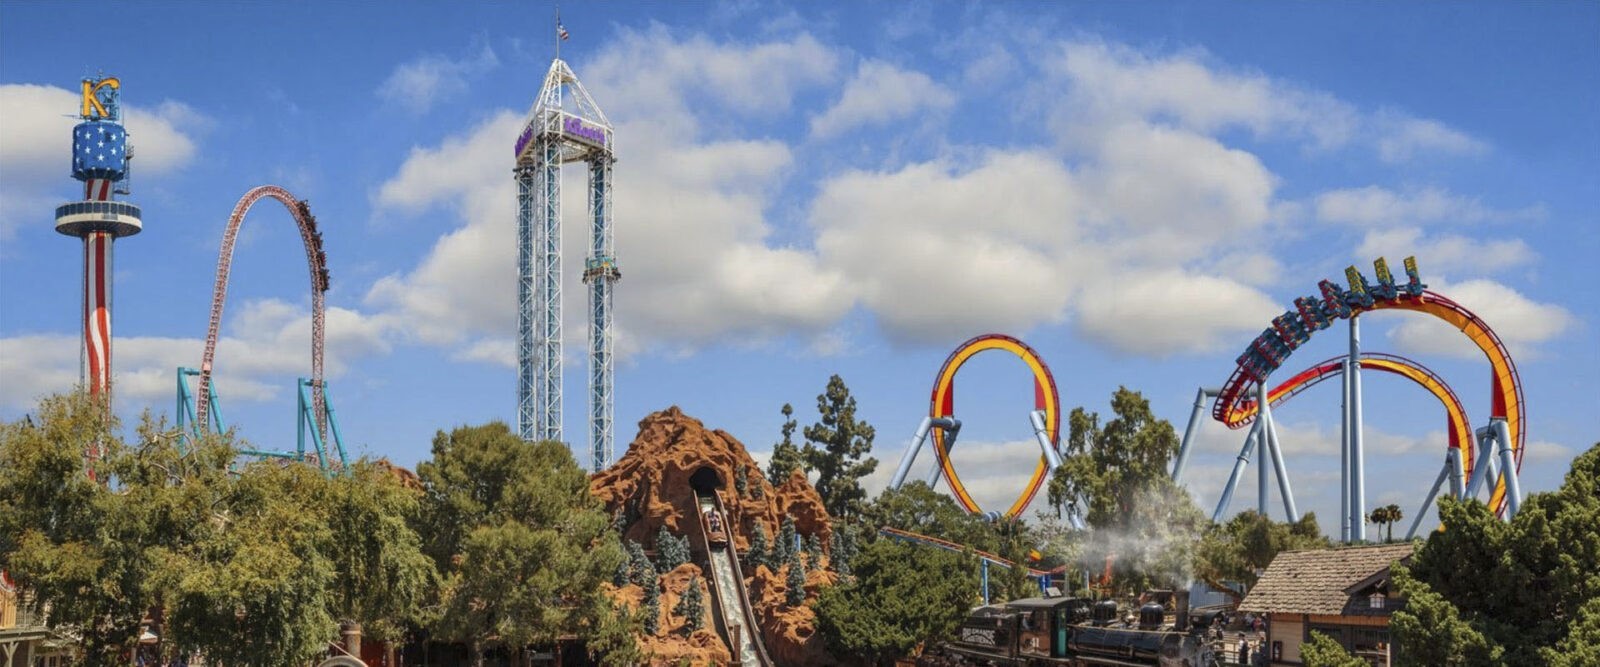 Knott’s Berry Farm Theme Park is a great place to spend time with friend and family.